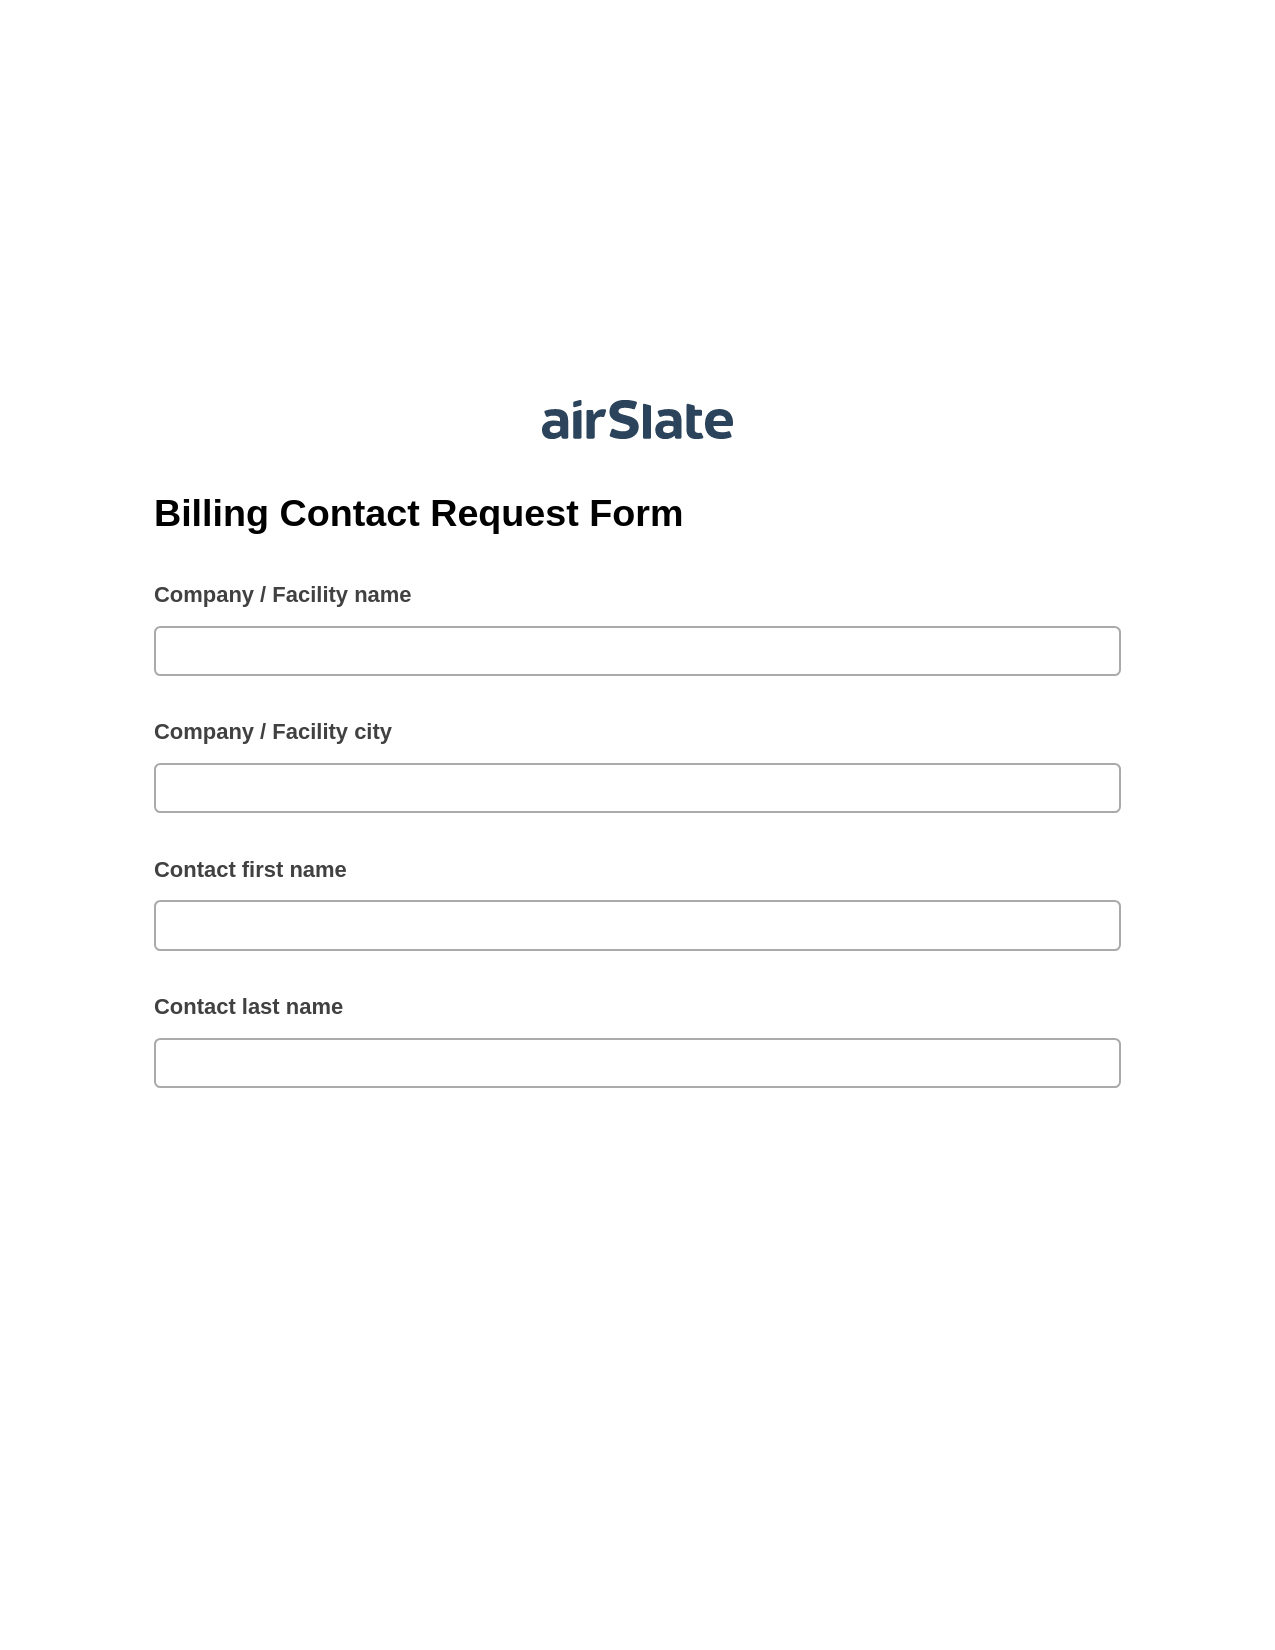 Multirole Billing Contact Request Form Pre-fill from Salesforce Records with SOQL Bot, Webhook Bot, Slack Notification Postfinish Bot